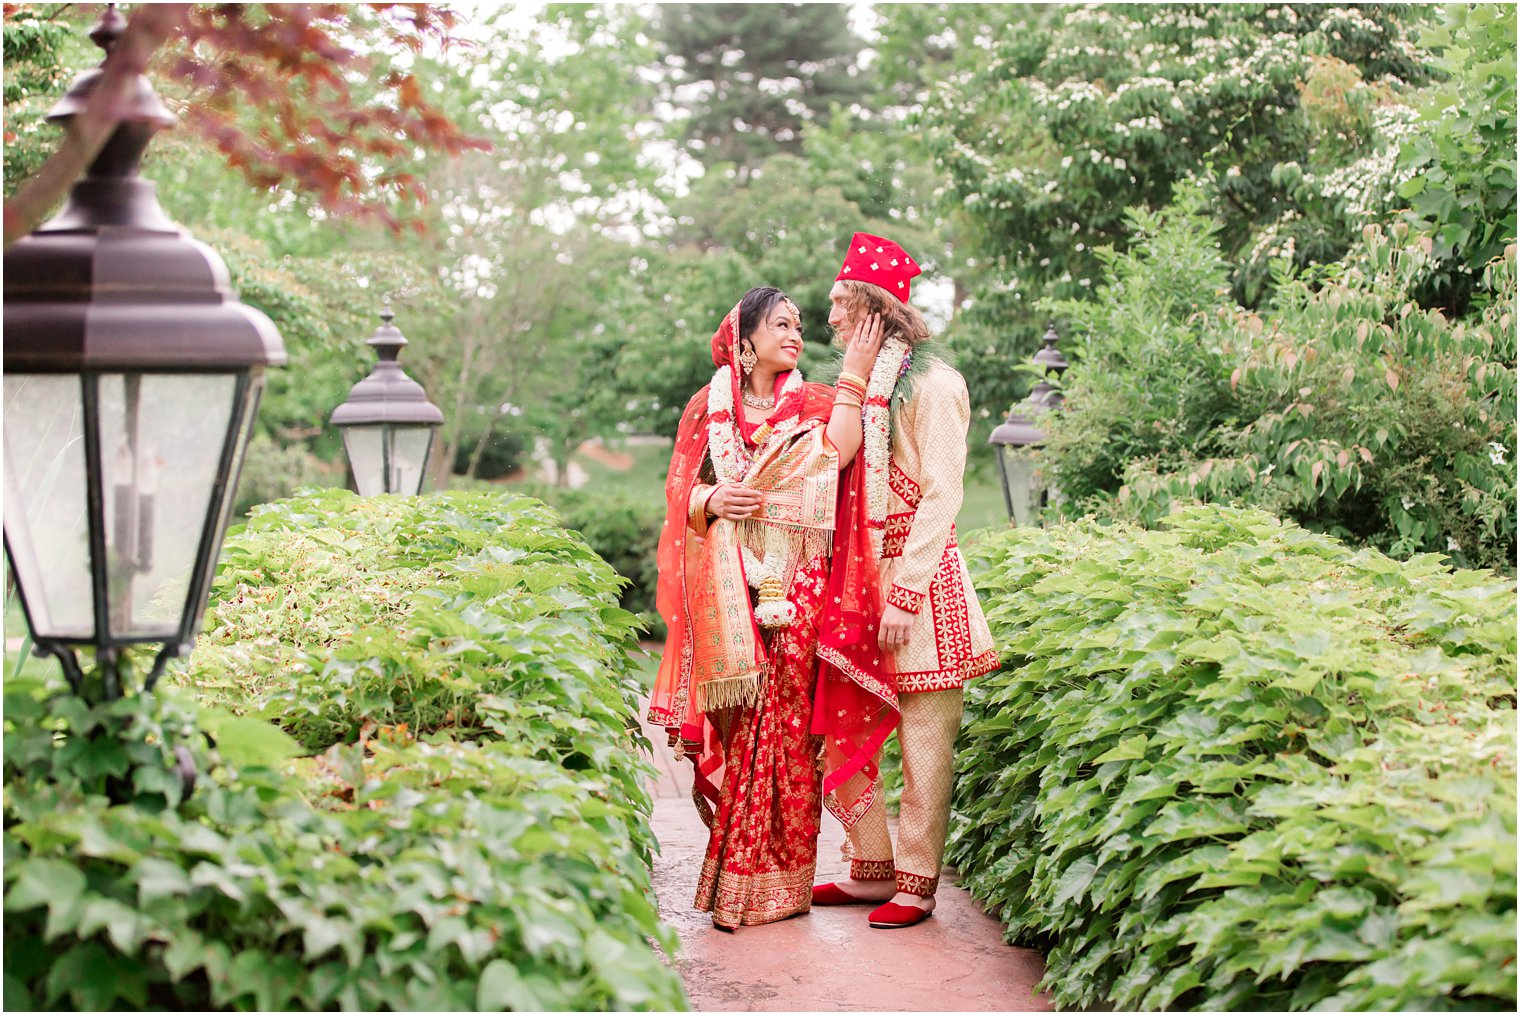 bride and groom pose in gardens of Ashford Estate in traditional red and gold attire for Indian wedding